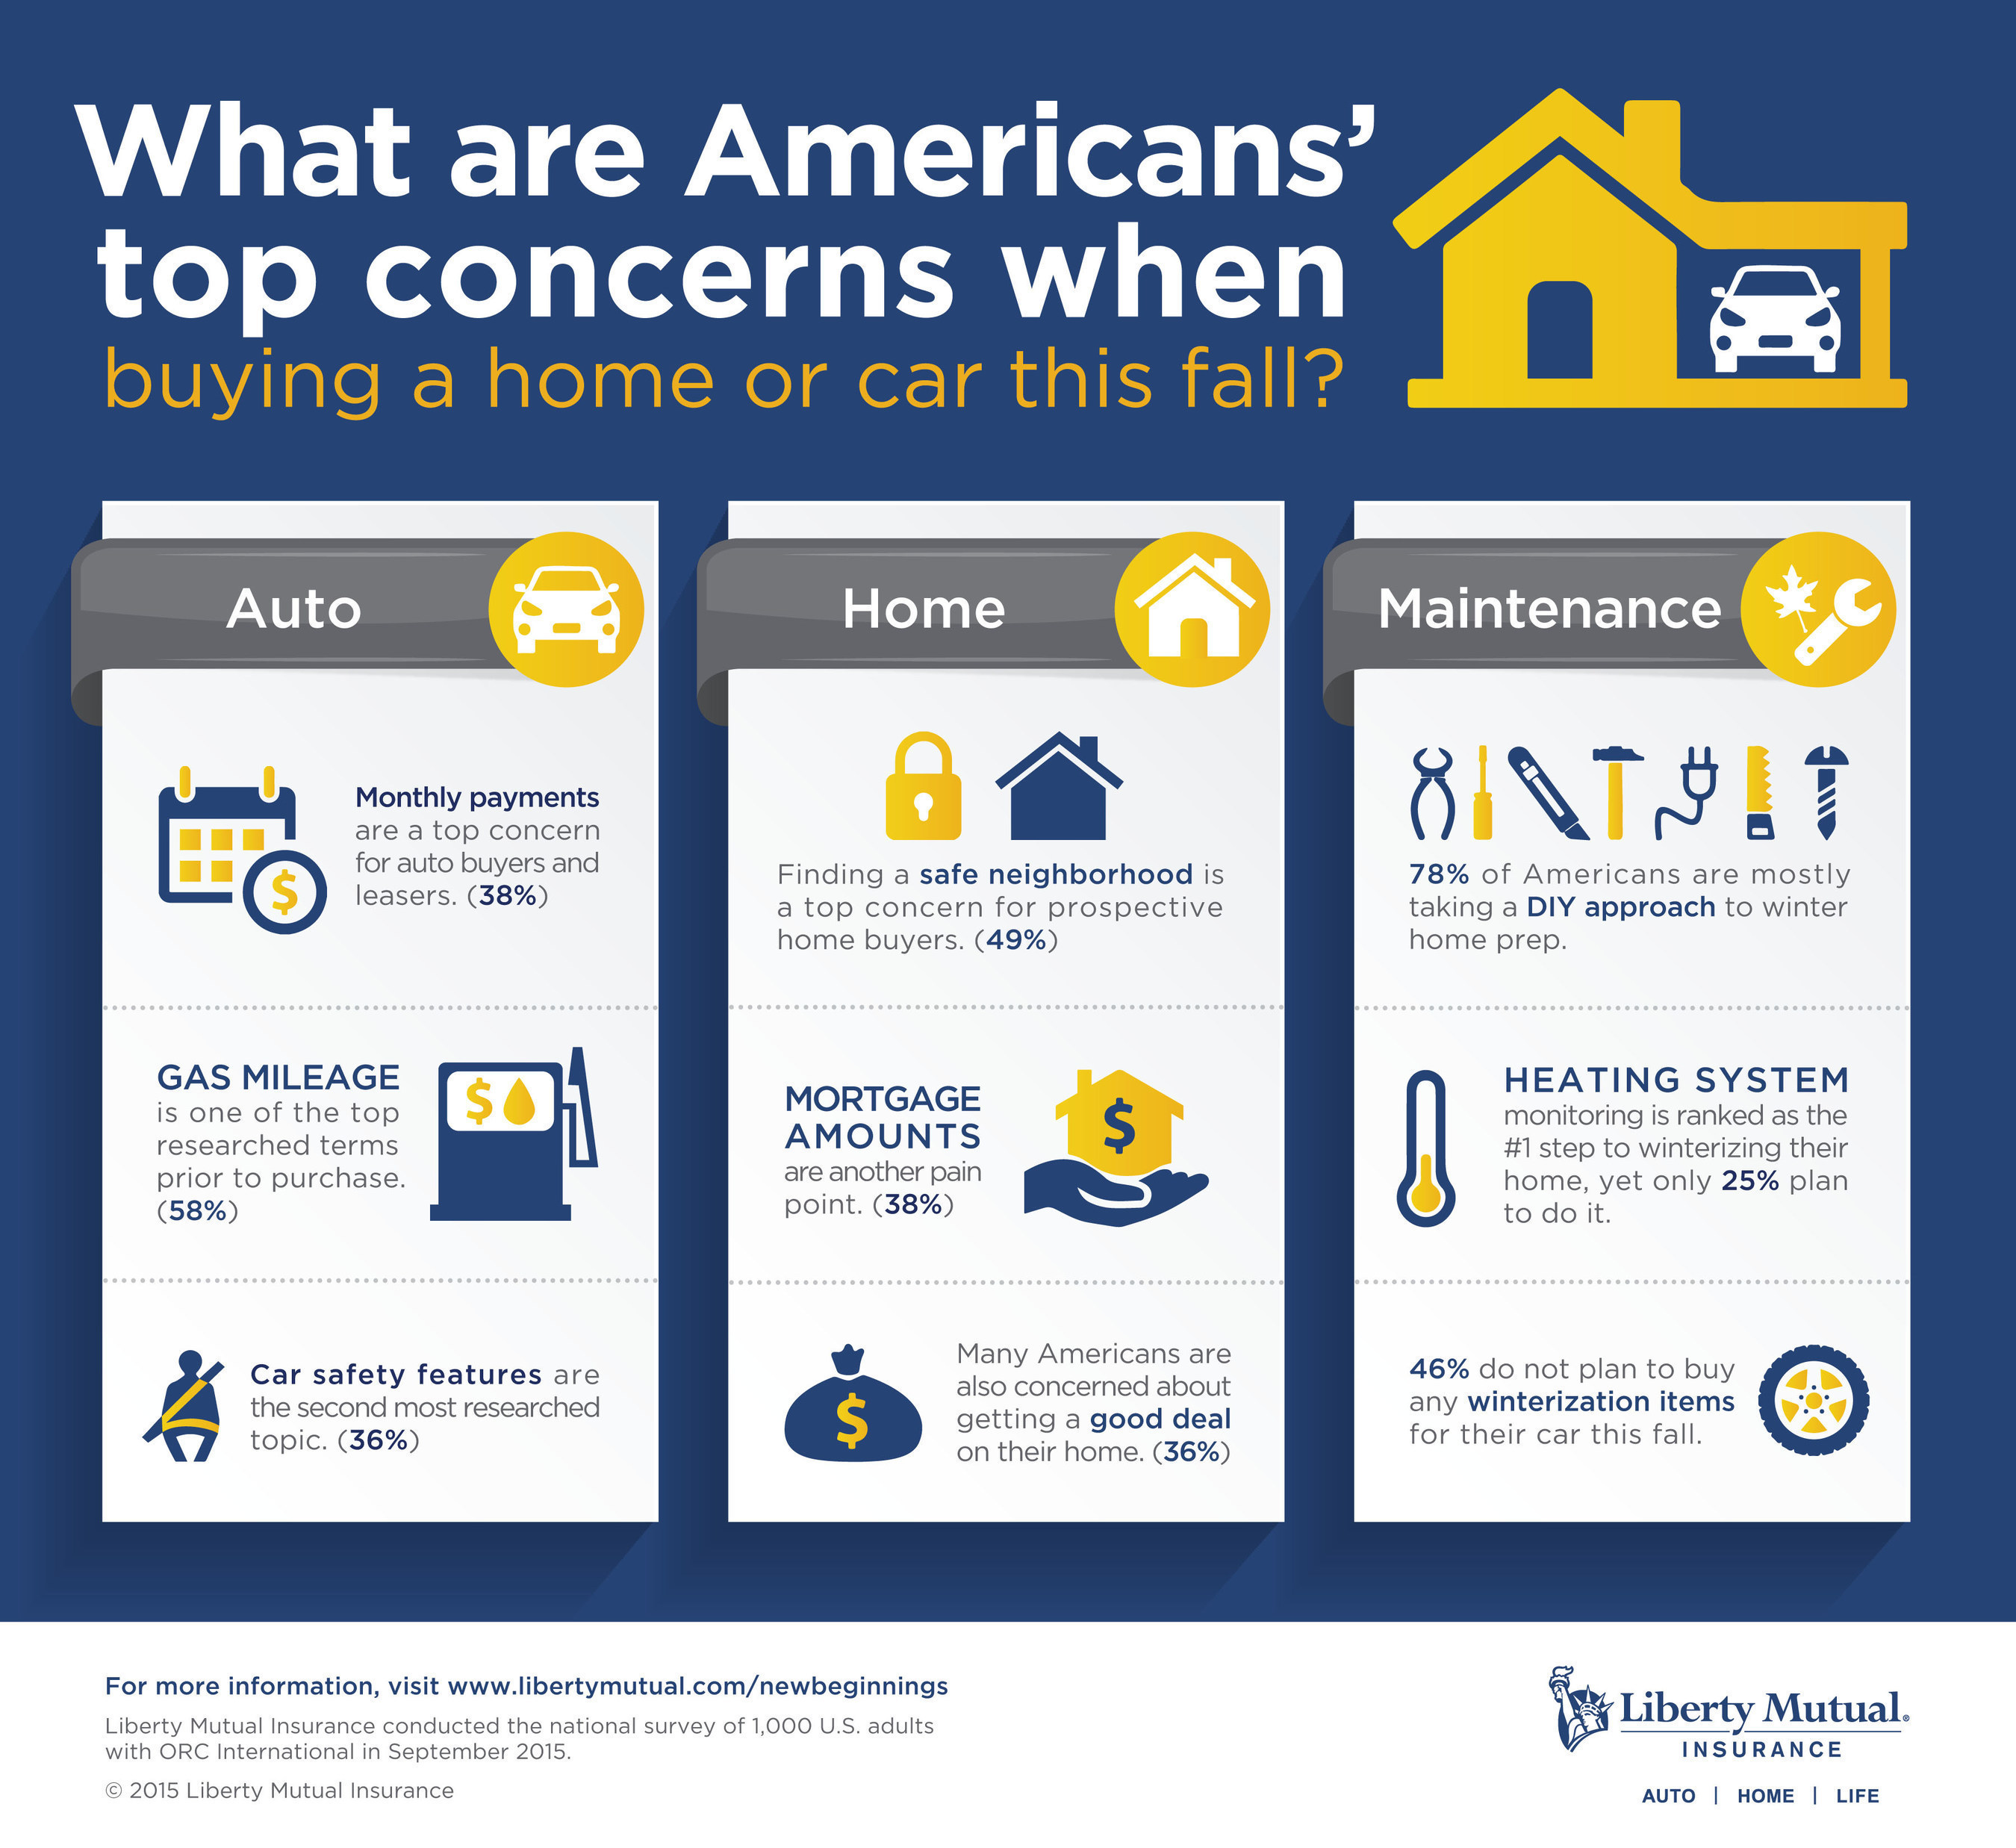 A new Liberty Mutual Insurance survey shows savings and safety are top of mind as Americans prepare for home and auto purchases this fall.